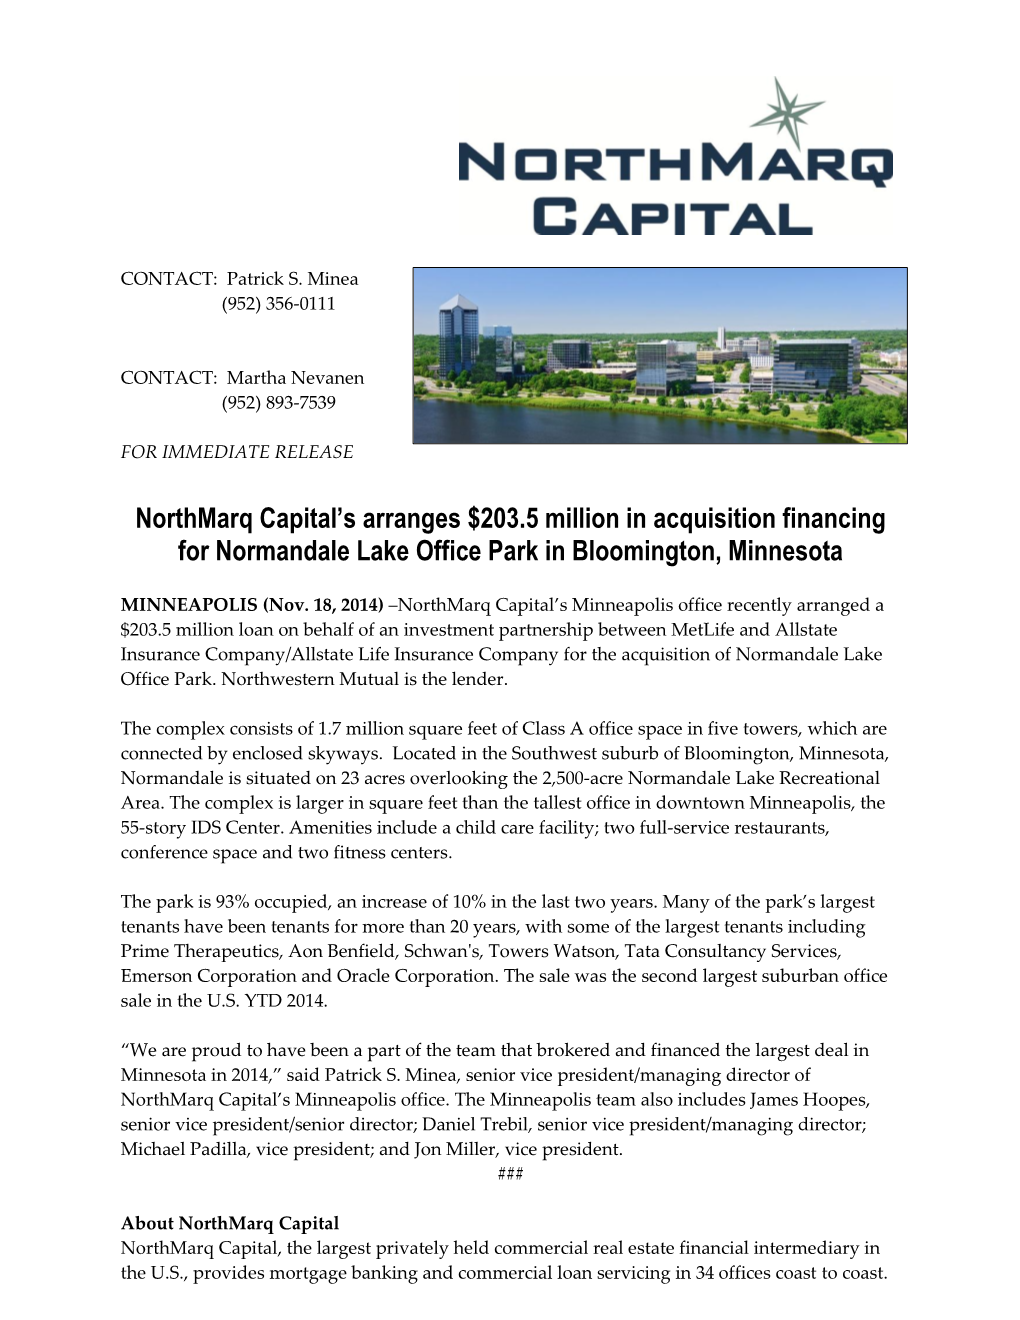 Northmarq Capital's Arranges $203.5 Million in Acquisition Financing For